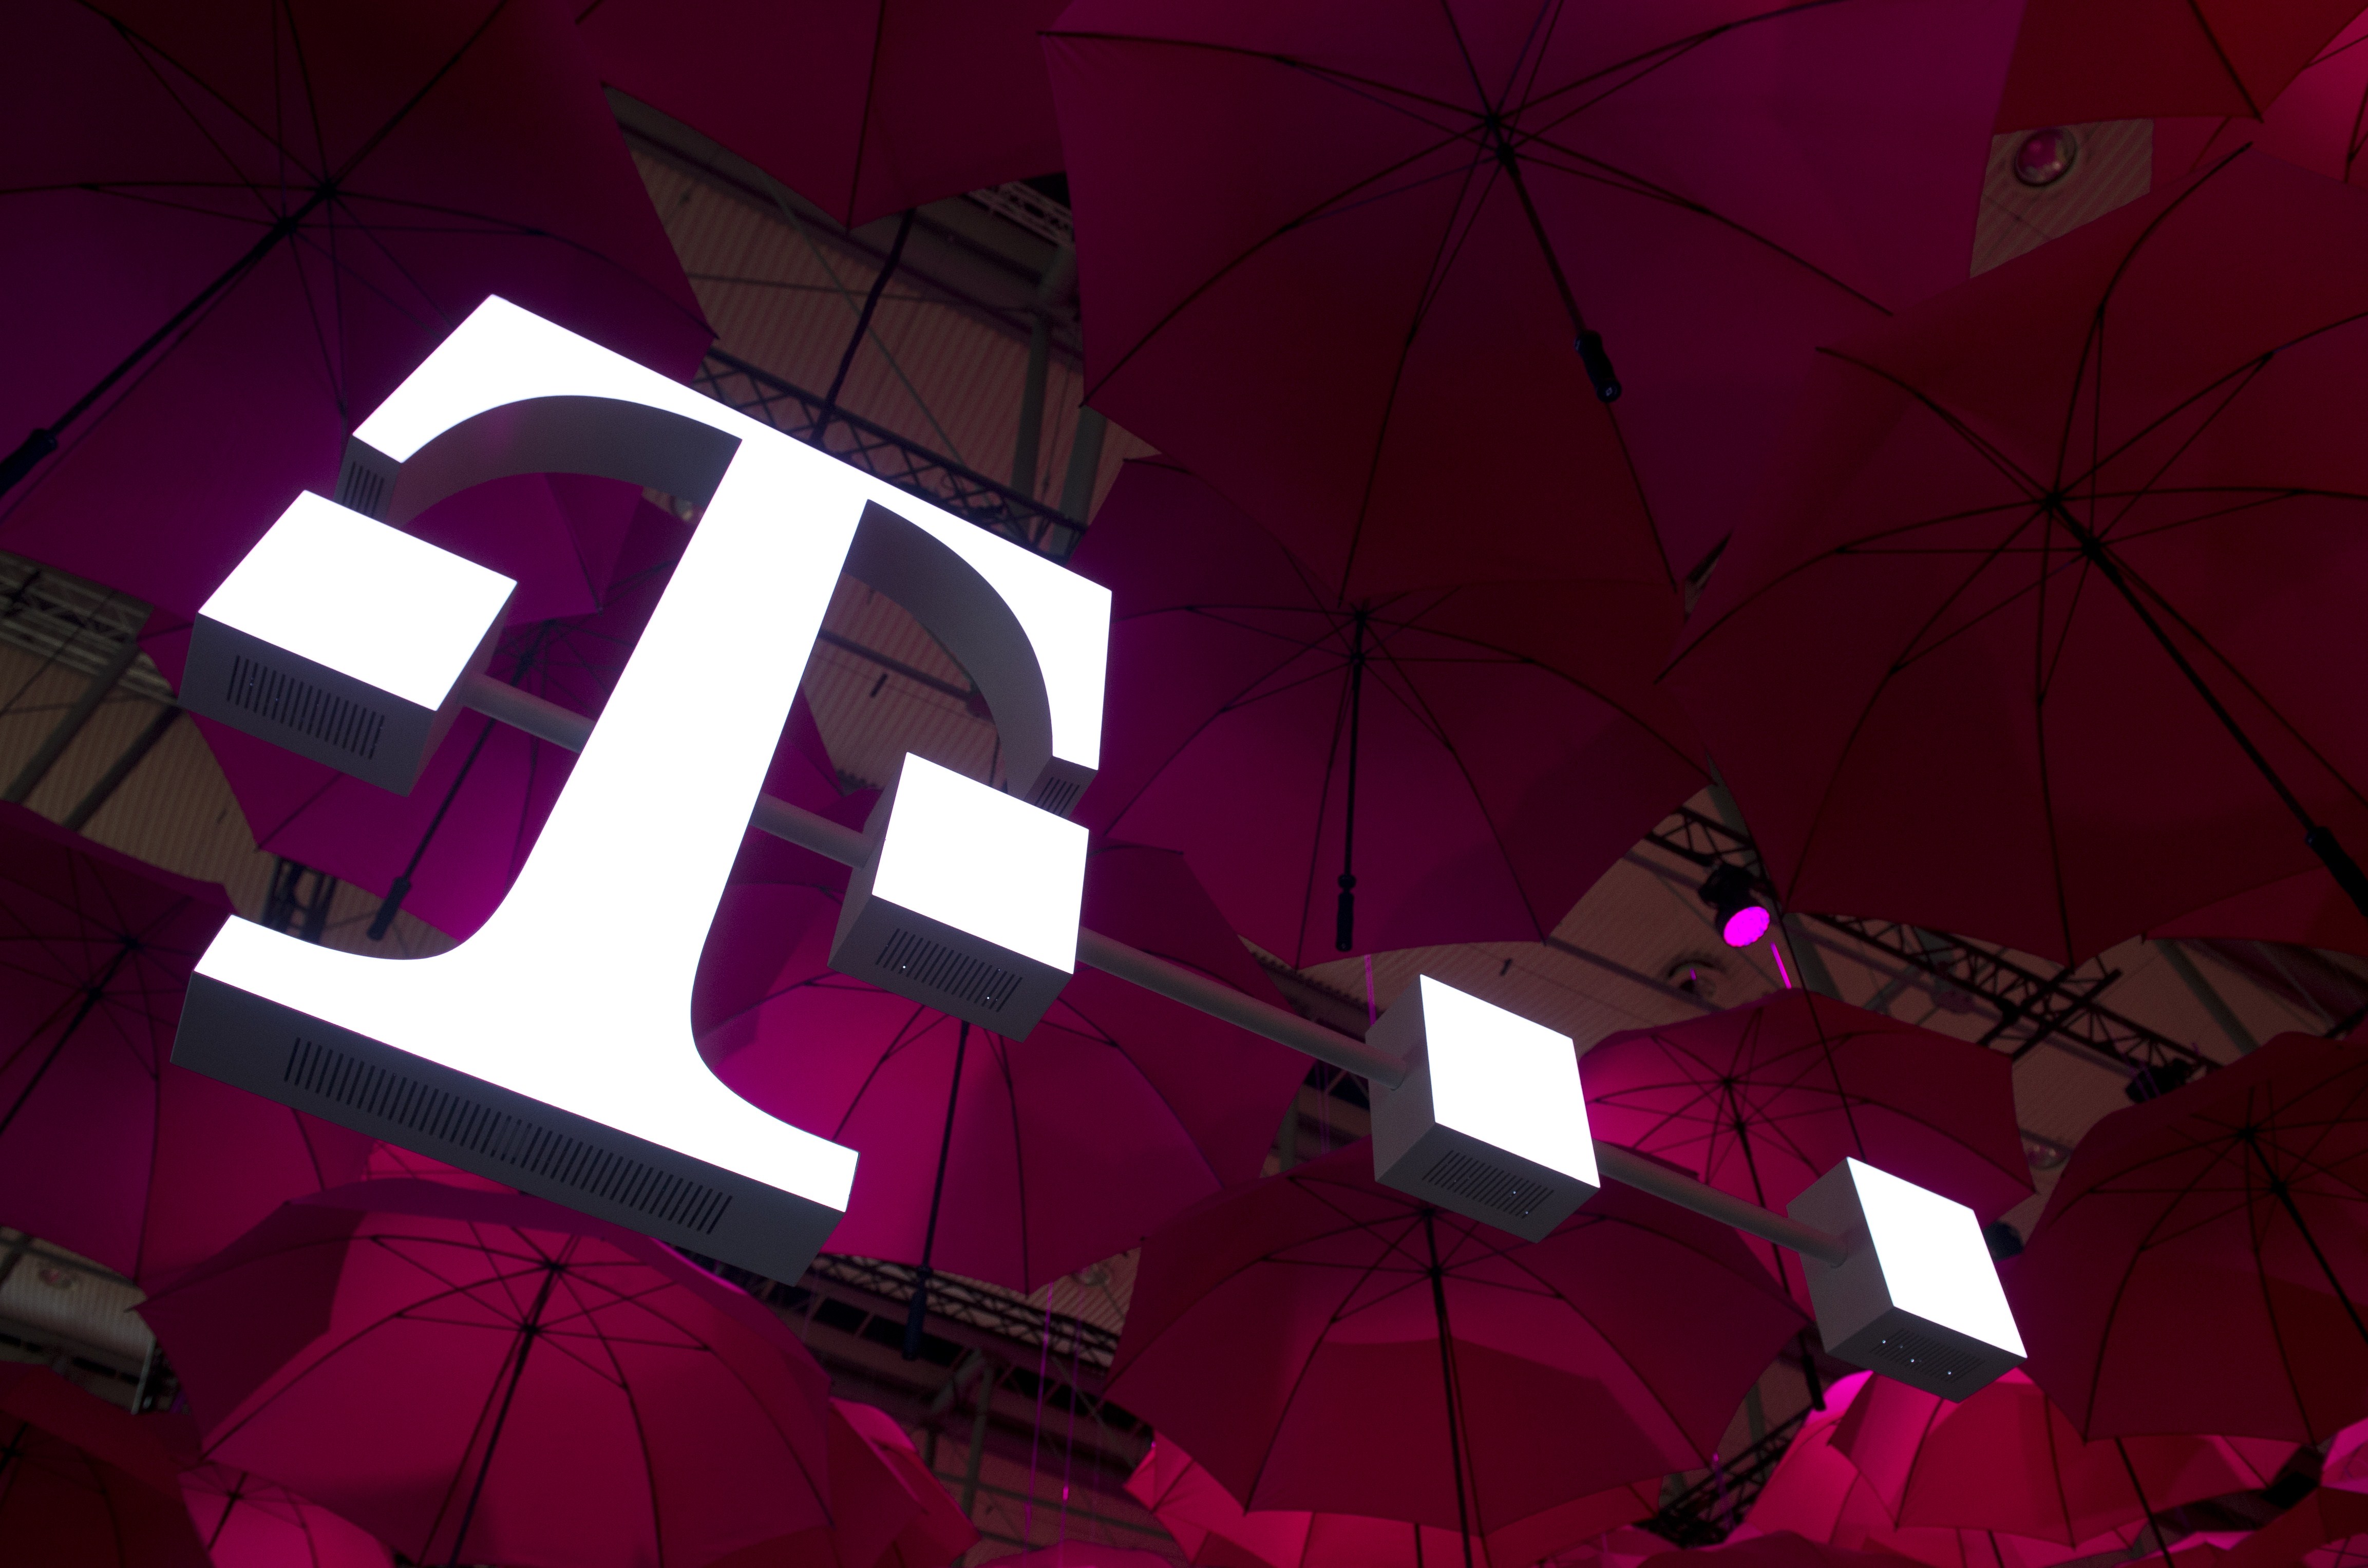 A Deutsche Telekom T-Mobile logo hangs under pink umbrellas at the stand of the German telecommunications giant at the 2014 CeBIT computer technology trade fair on March 10, 2014 in Hanover, central Germany. (John Macdougall&mdash;AFP/Getty Images)